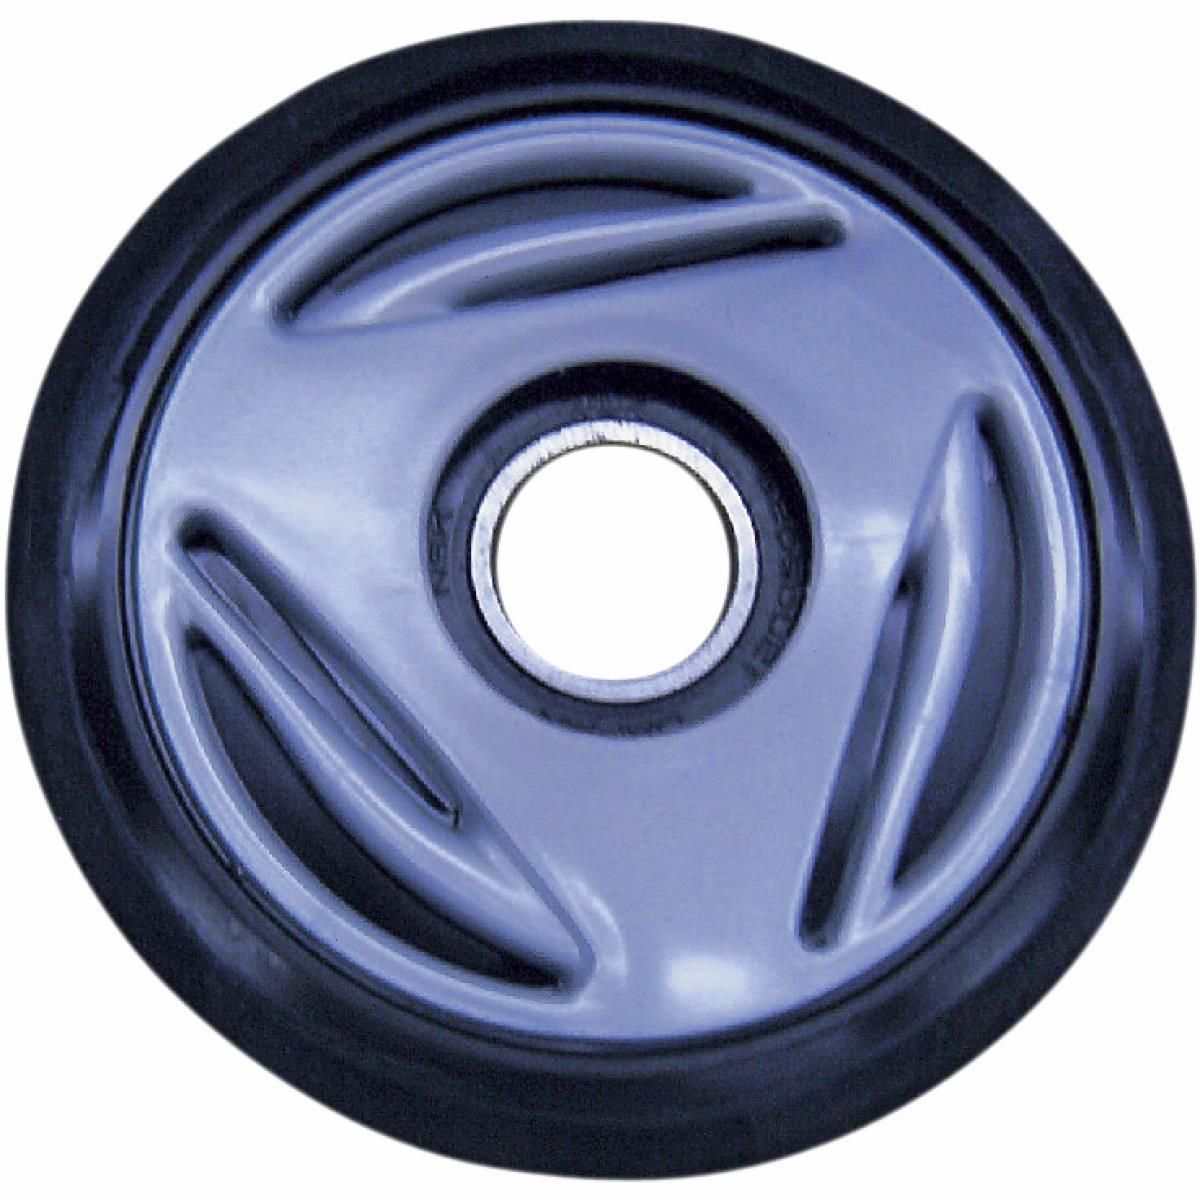 32XY-PARTS-UNLIM-47020029 Colored Idler Wheel - 135mm (No Insert) - Silver